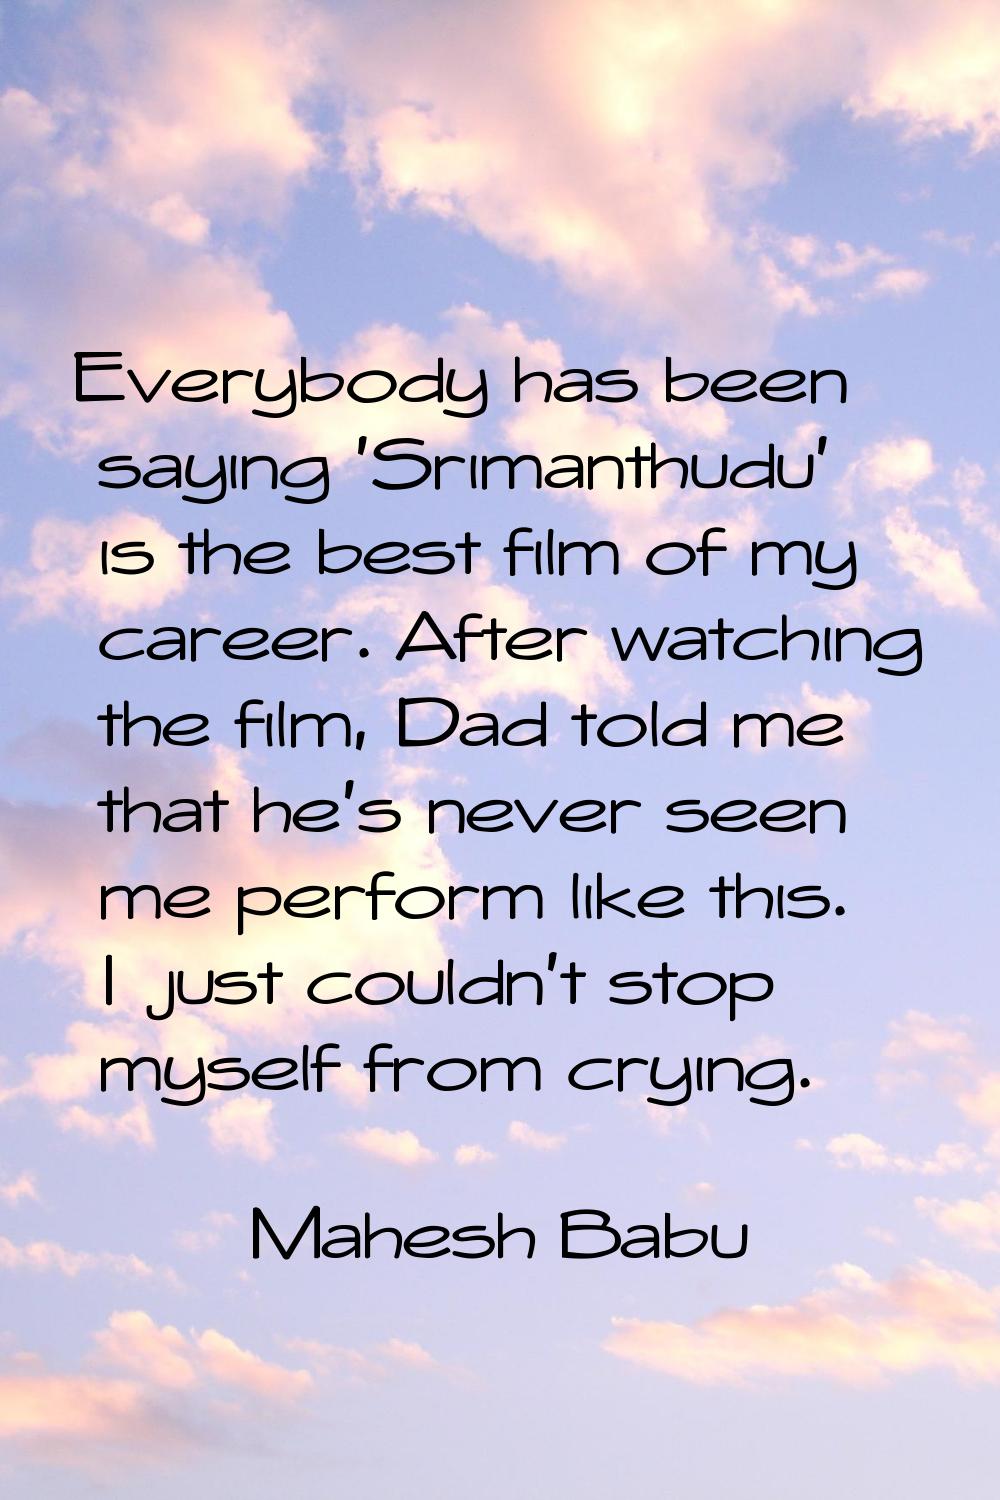 Everybody has been saying 'Srimanthudu' is the best film of my career. After watching the film, Dad